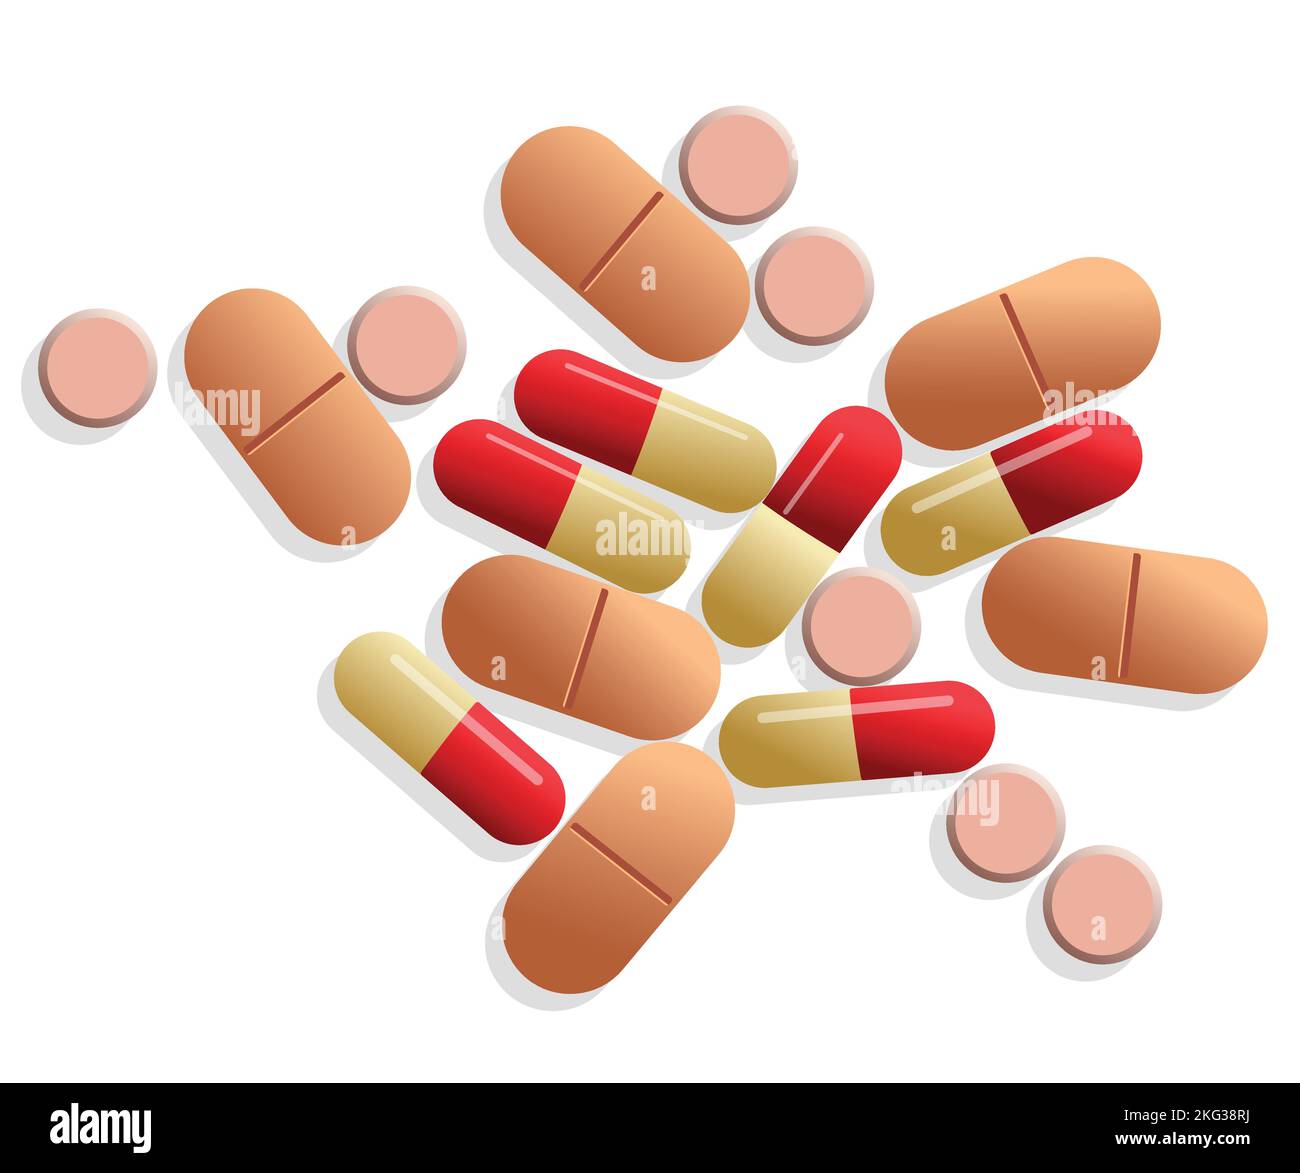 vector illustration of somecolored  pills and tablets isolated on white background - concept of drug abuse Stock Vector